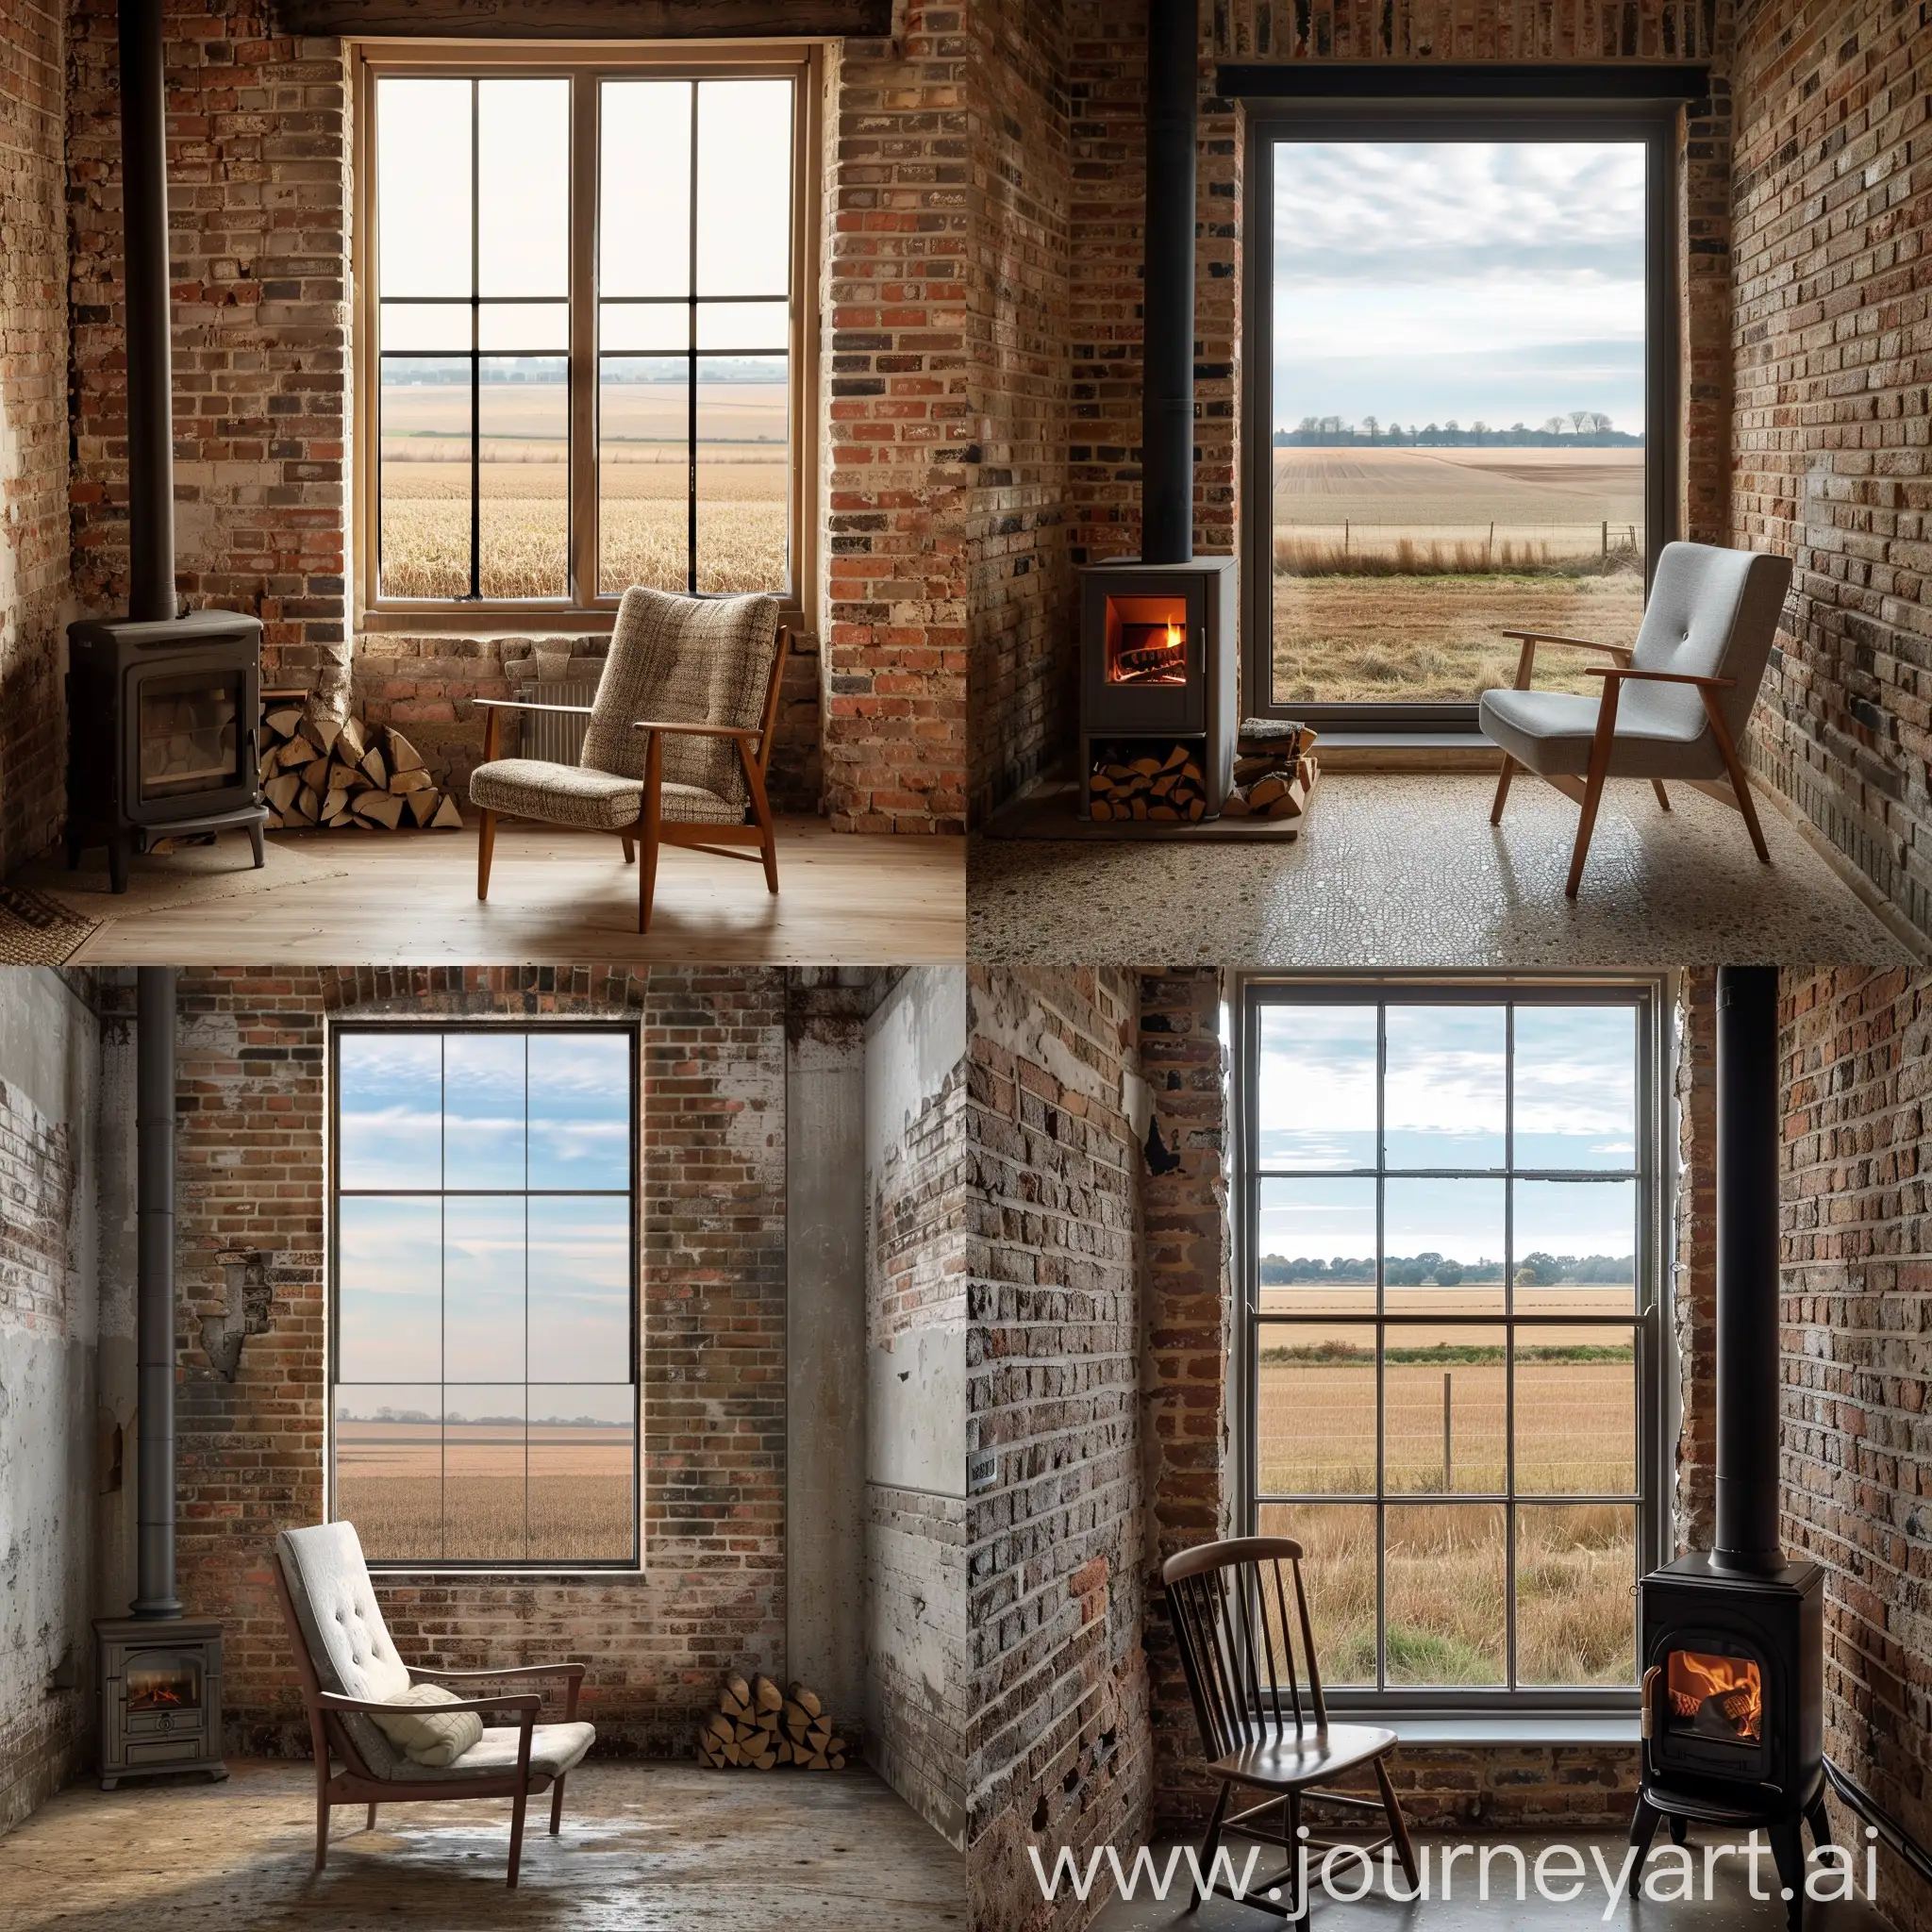 Cozy-Loft-Ambiance-with-Chair-Wood-Stove-and-Vast-Field-View